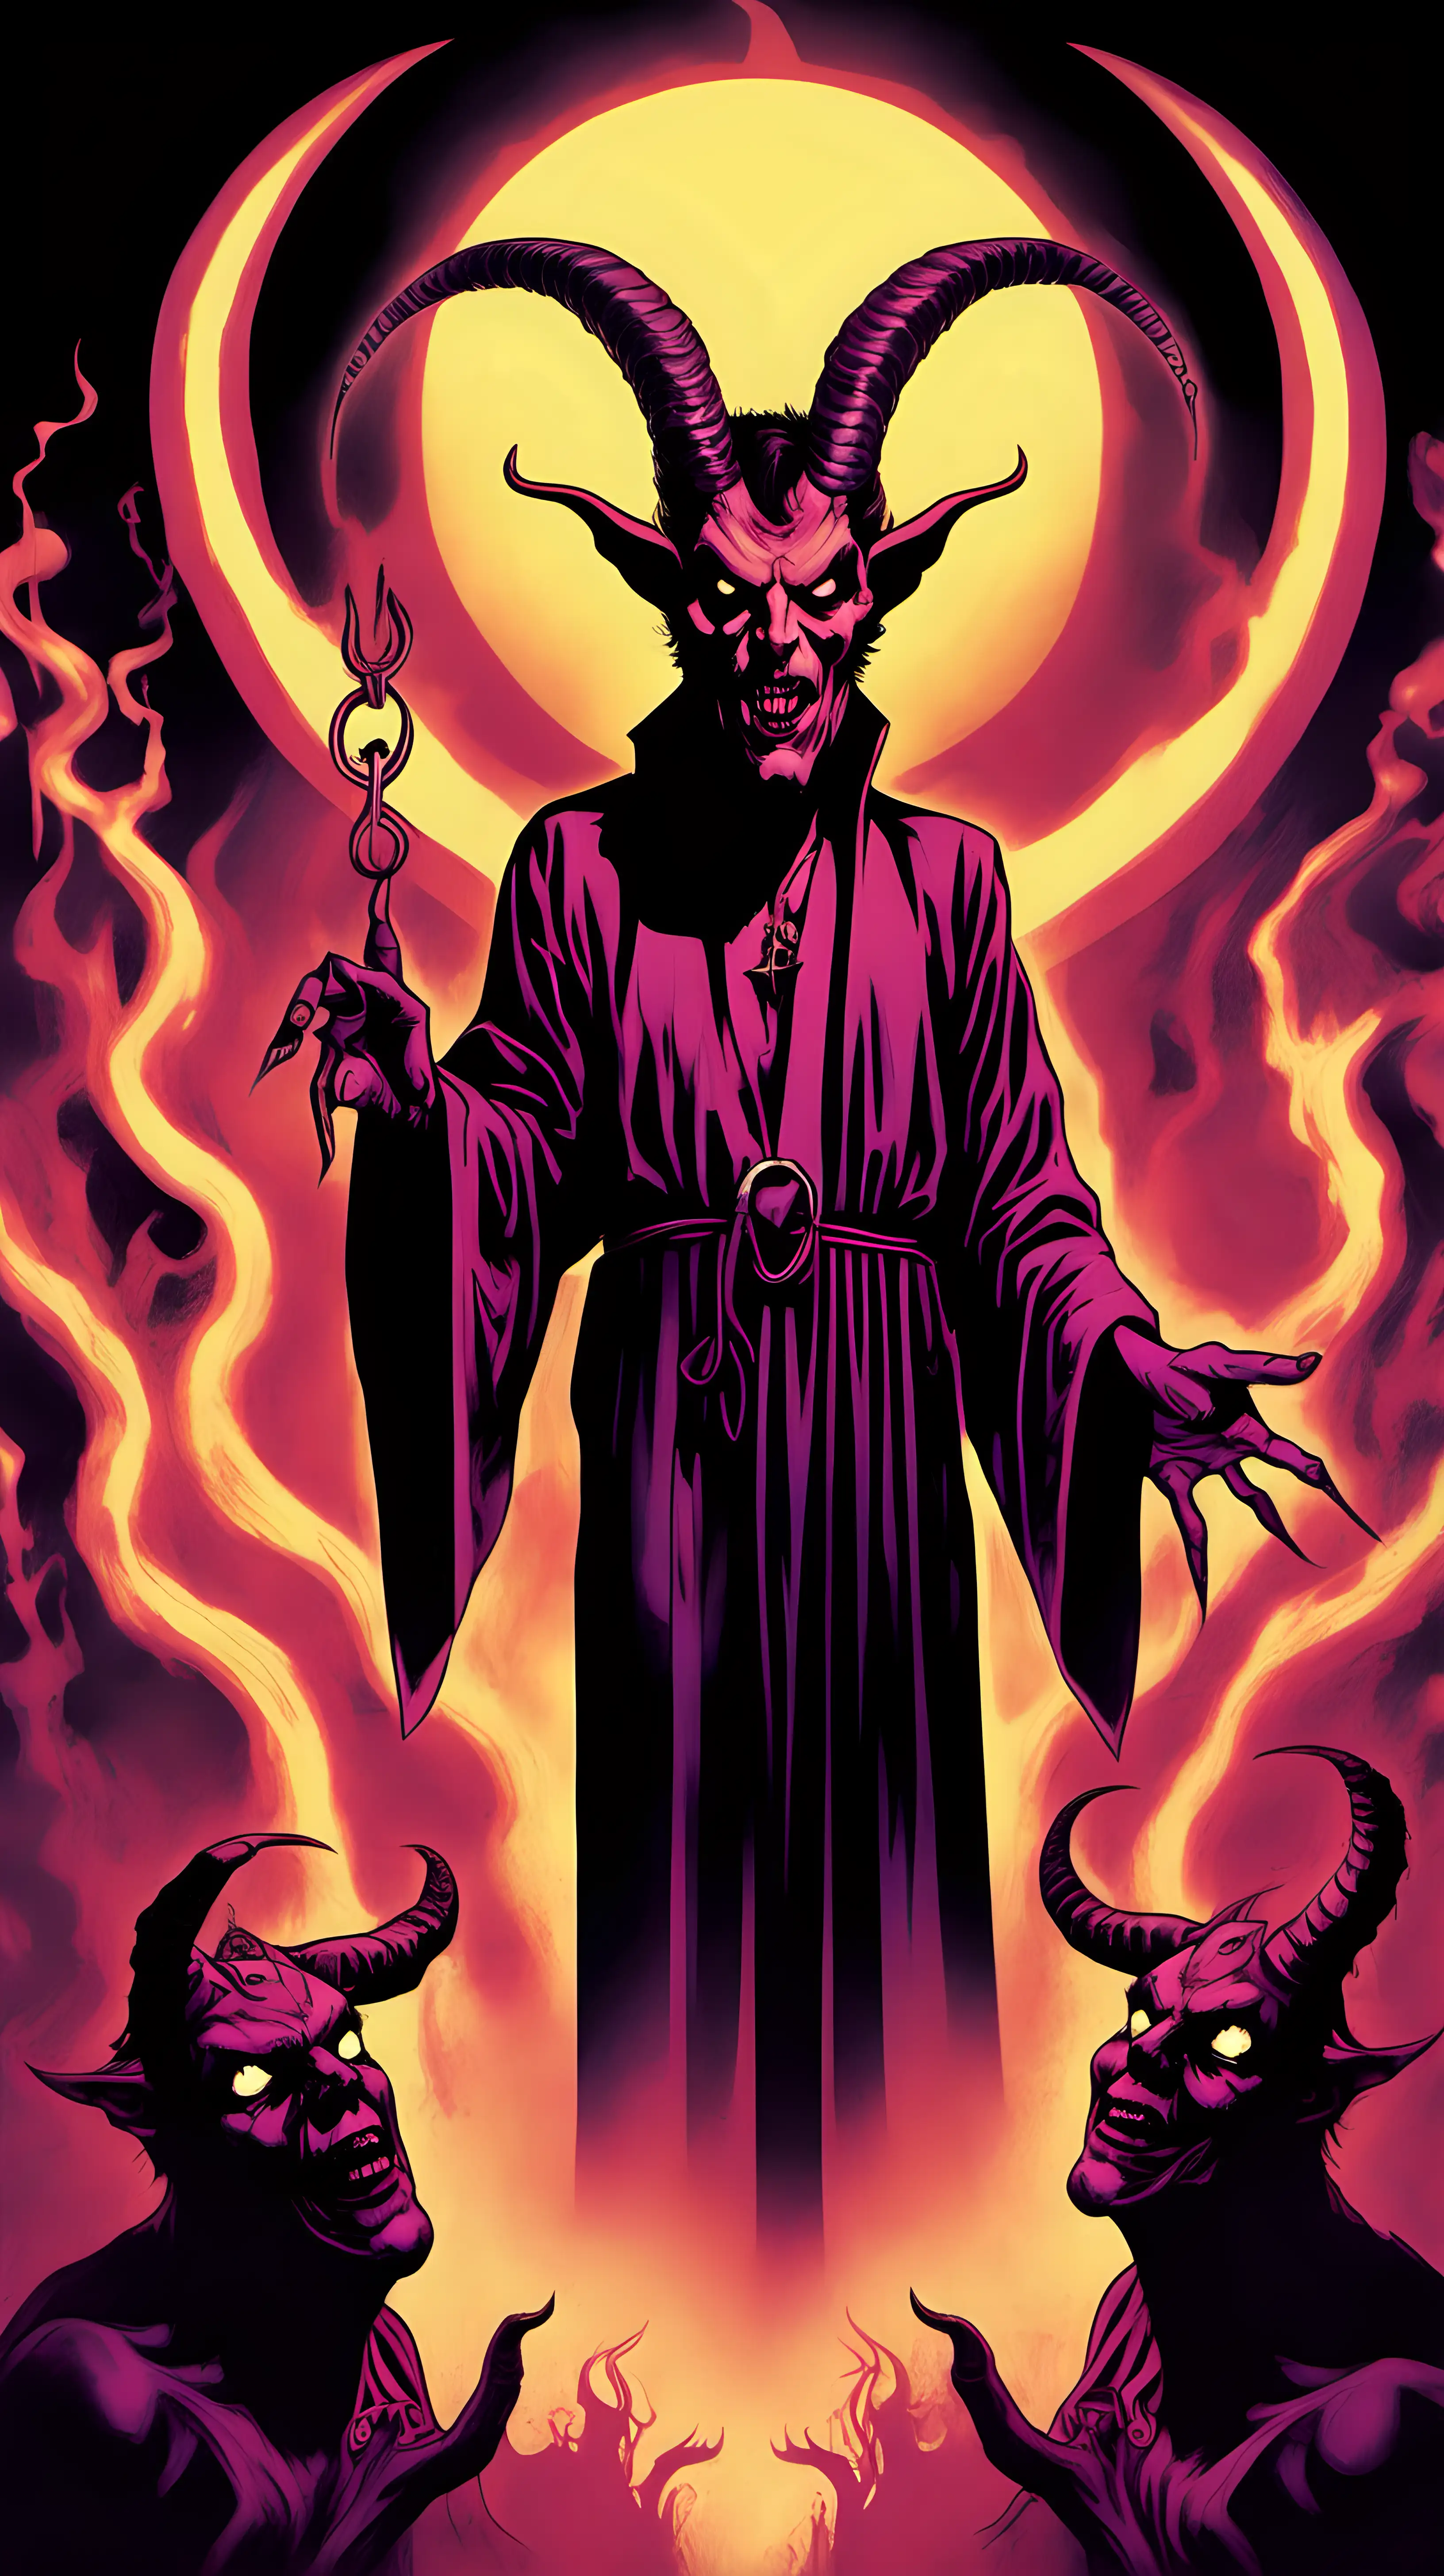 Illustrate a 1970s-style blend 1980s-style graphic of satan the devil in the style of half goat with evil eyes floating, giving the illustration a very Drew Struzan style.